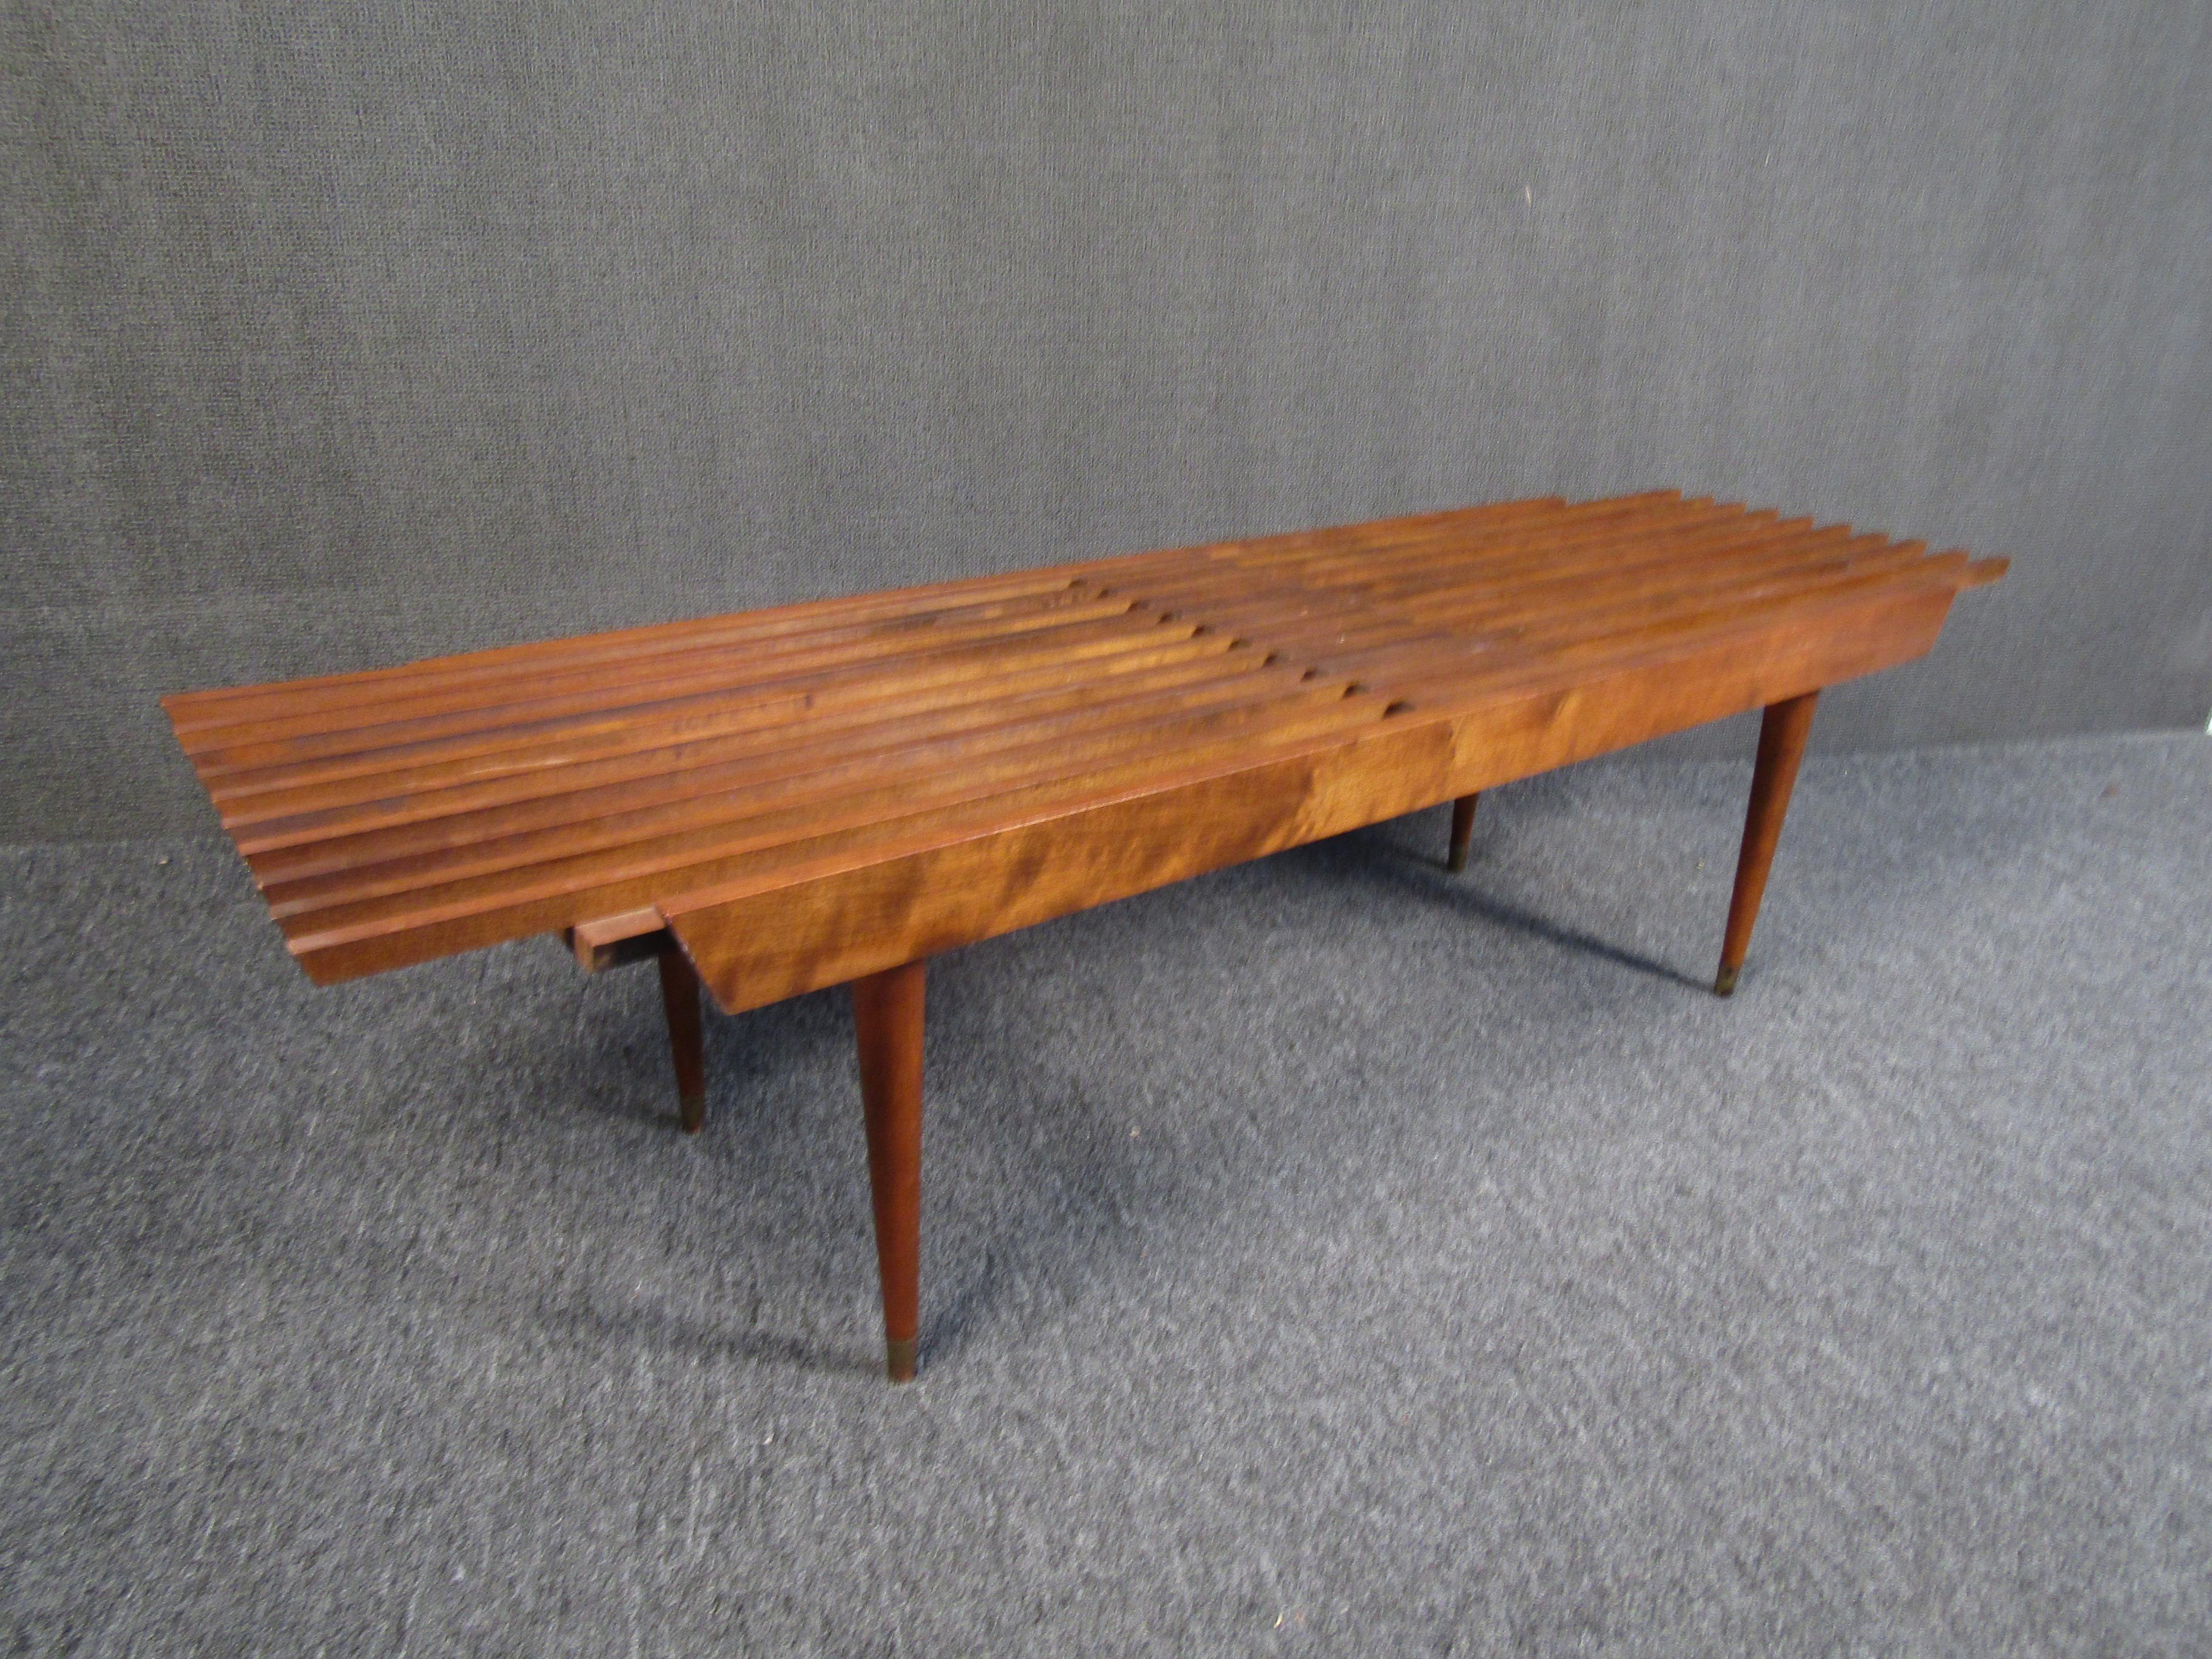 One of a kind vintage modern slat bench that extends in width. A great piece for any entryway or seating area, this bench shows off rich woodgrain and tapered legs with metal caps. Please confirm item location with seller (NY or NJ).